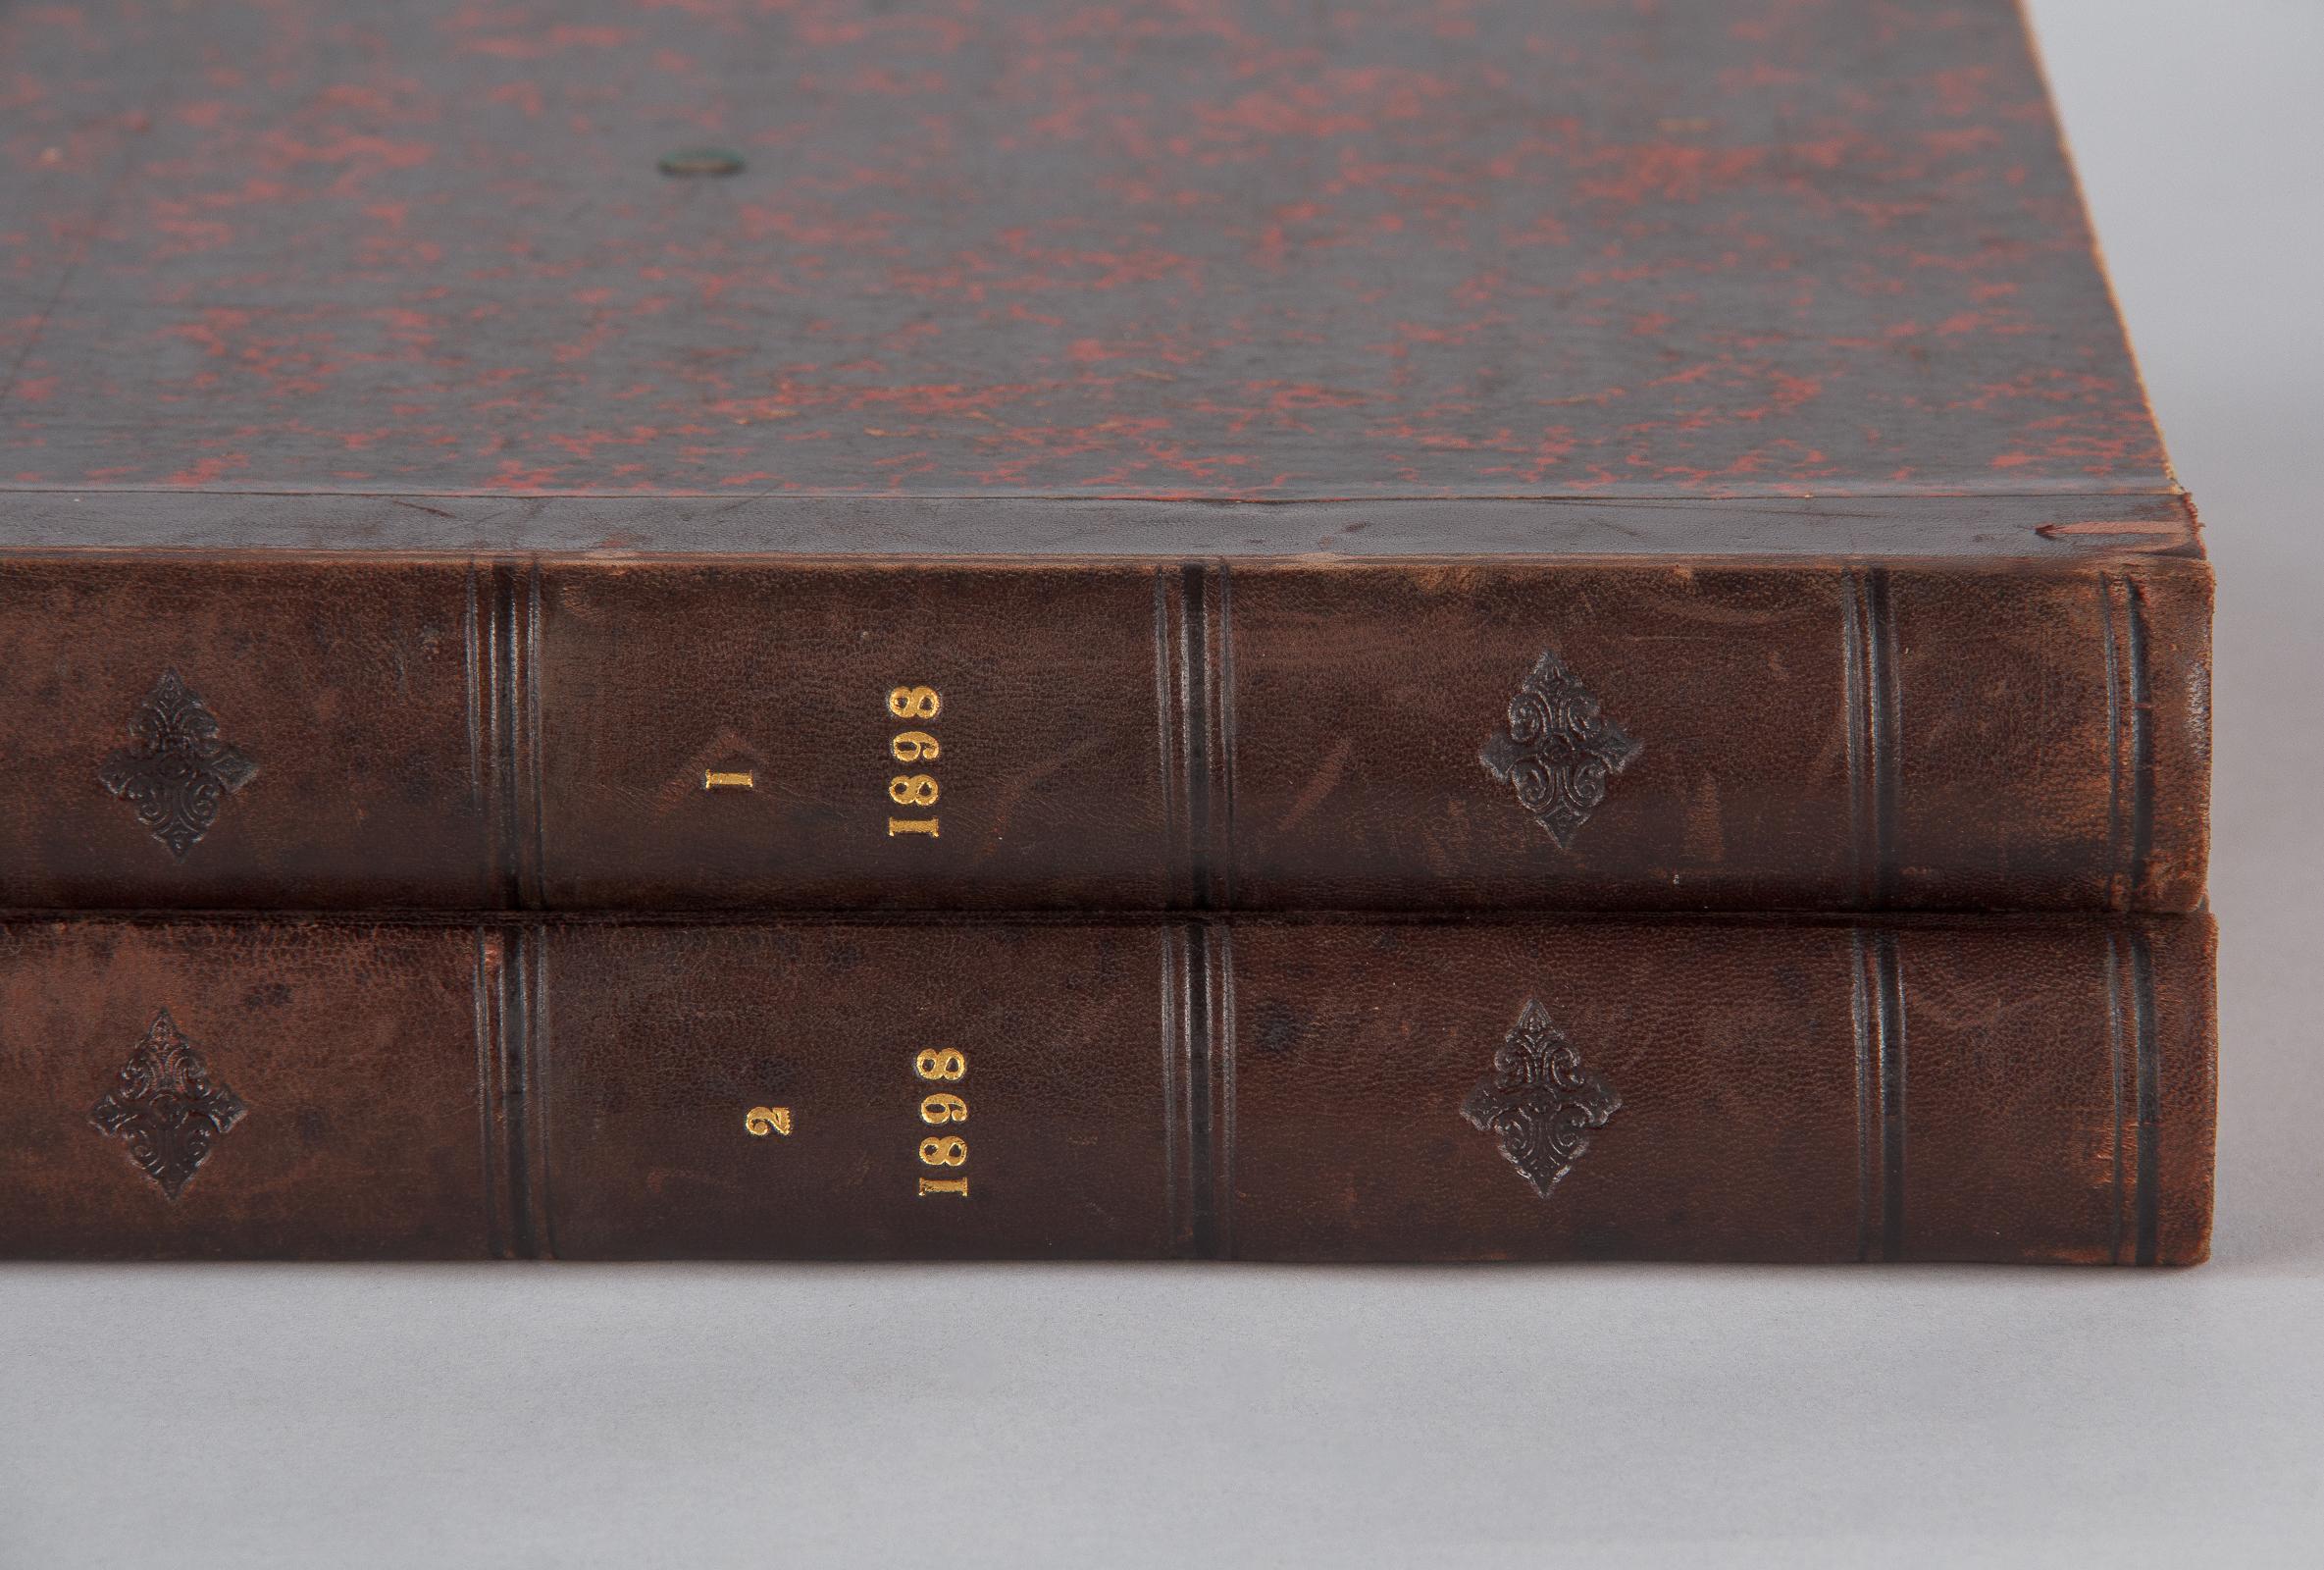 French Books L'Illustration, 2 Volumes, 1898 For Sale 4